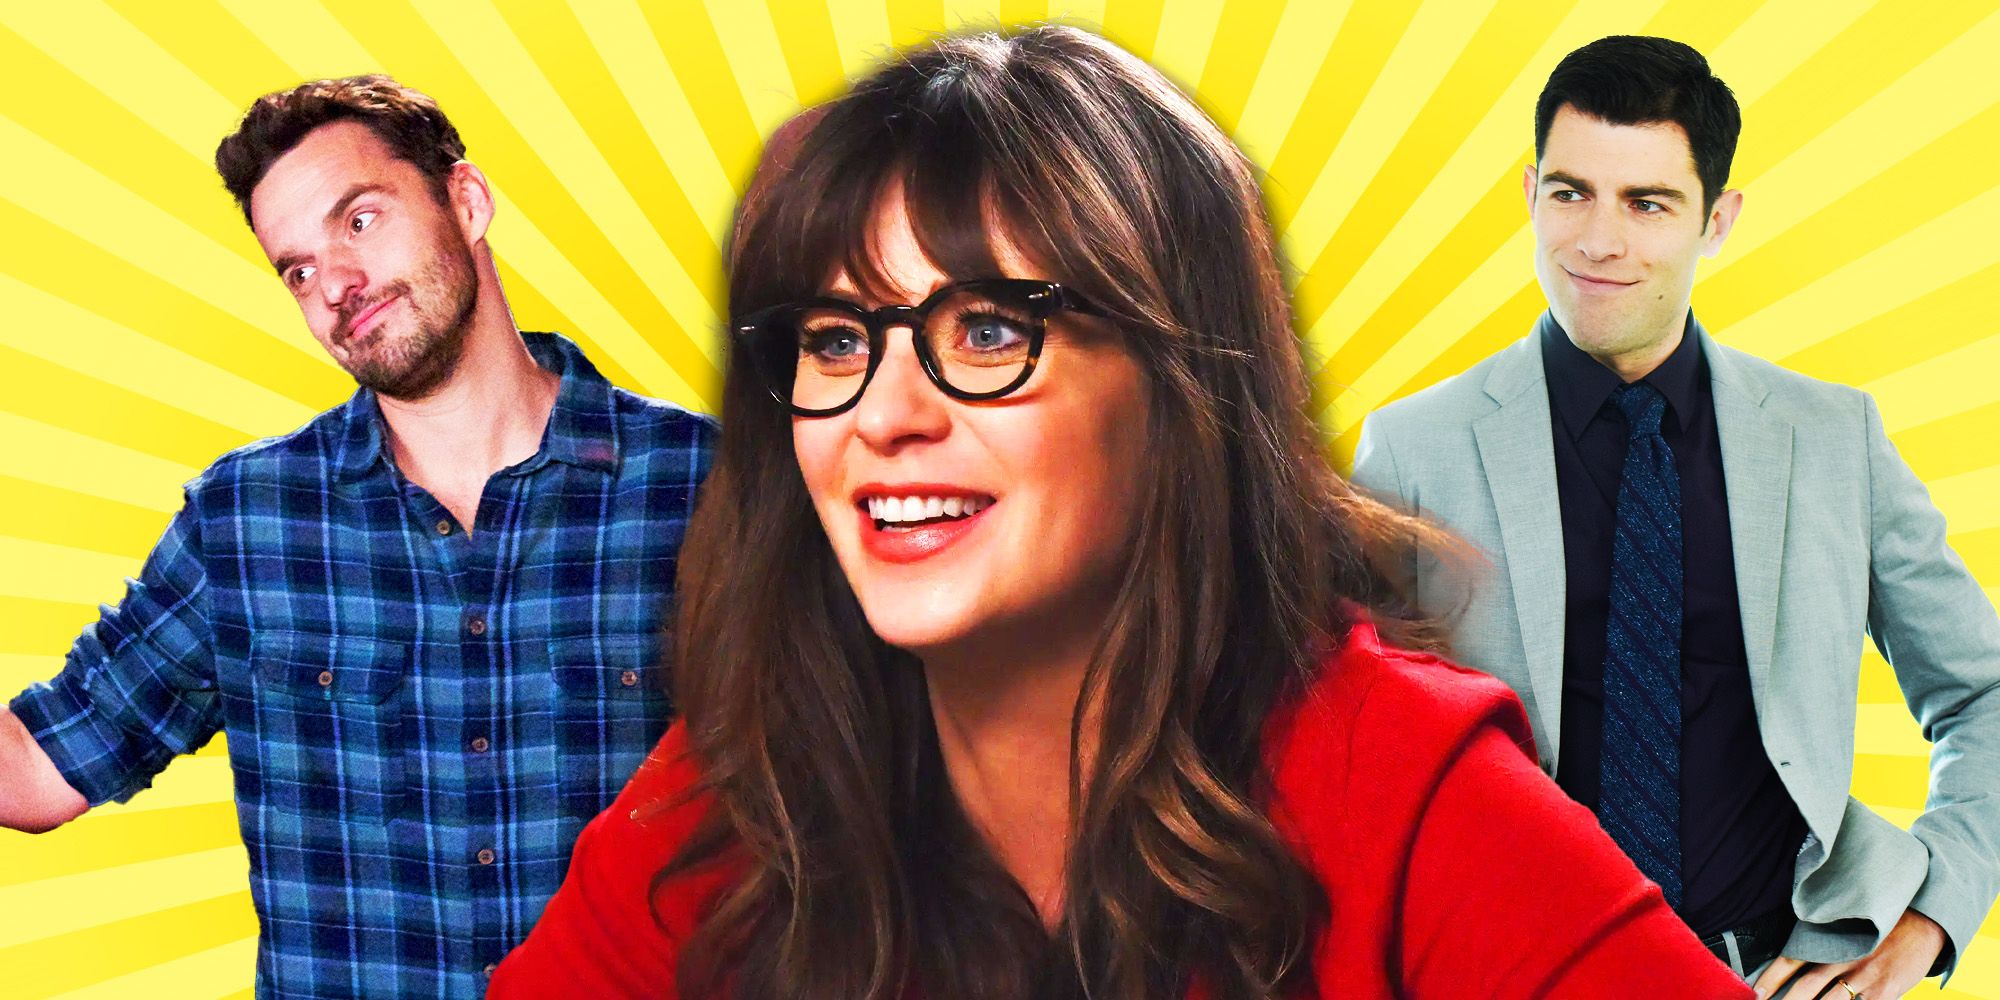 New Girl Jake Johnson as Nick Miller Zooey Deschanel as Jess Day and Max Greenfield as Schmidt